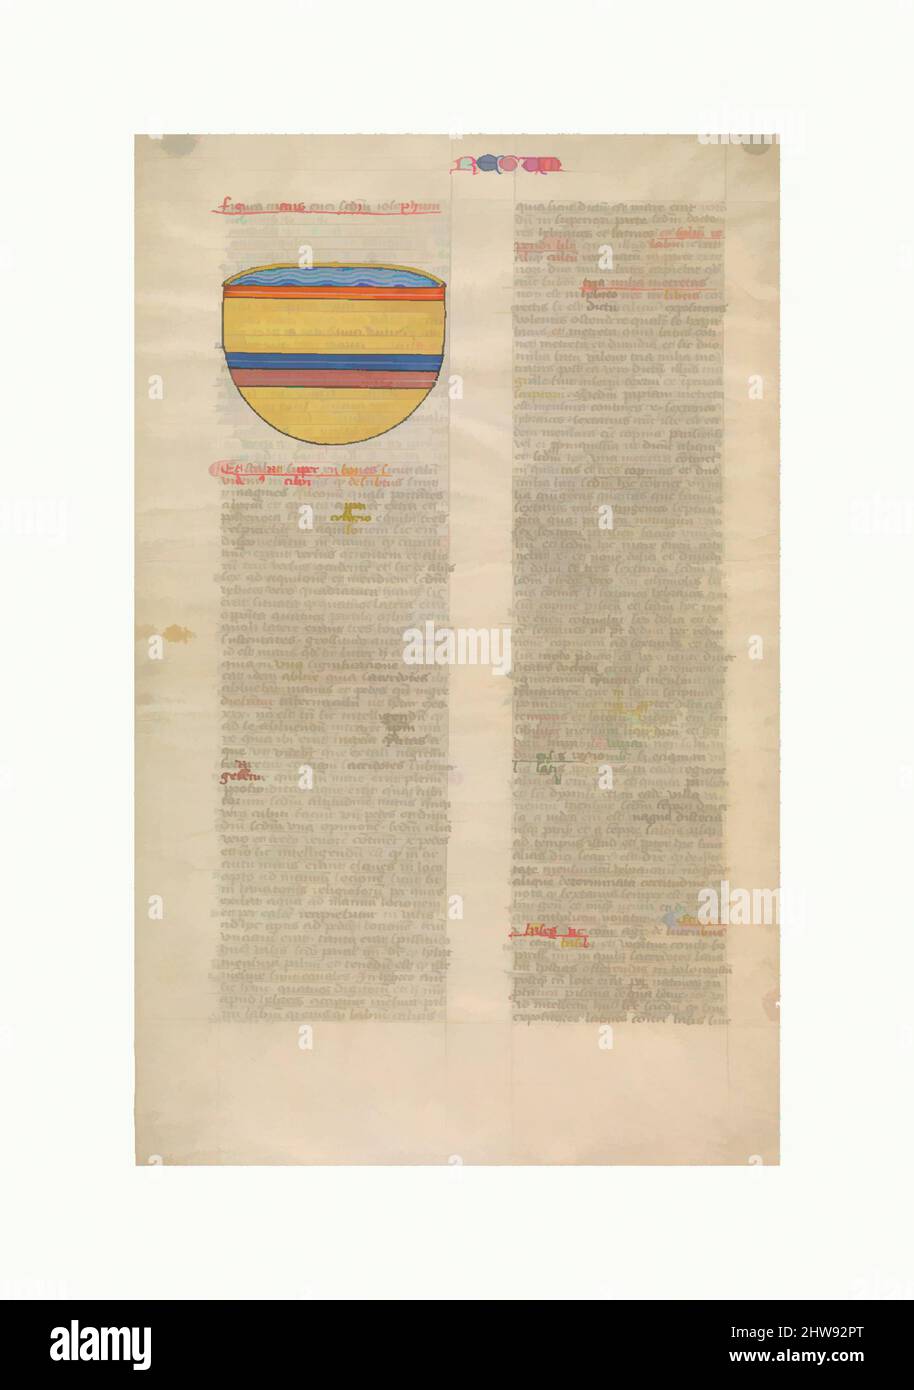 Art inspired by Brazen Sea, one of six illustrated leaves from the Postilla Litteralis (Literal Commentary) of Nicholas of Lyra, ca. 1360–1380, French, Opaque watercolor, iron-gall ink and gold on vellum, 16 1/2 x 9 3/4 in. (41.9 x 24.8 cm), Manuscripts and Illuminations, Classic works modernized by Artotop with a splash of modernity. Shapes, color and value, eye-catching visual impact on art. Emotions through freedom of artworks in a contemporary way. A timeless message pursuing a wildly creative new direction. Artists turning to the digital medium and creating the Artotop NFT Stock Photo